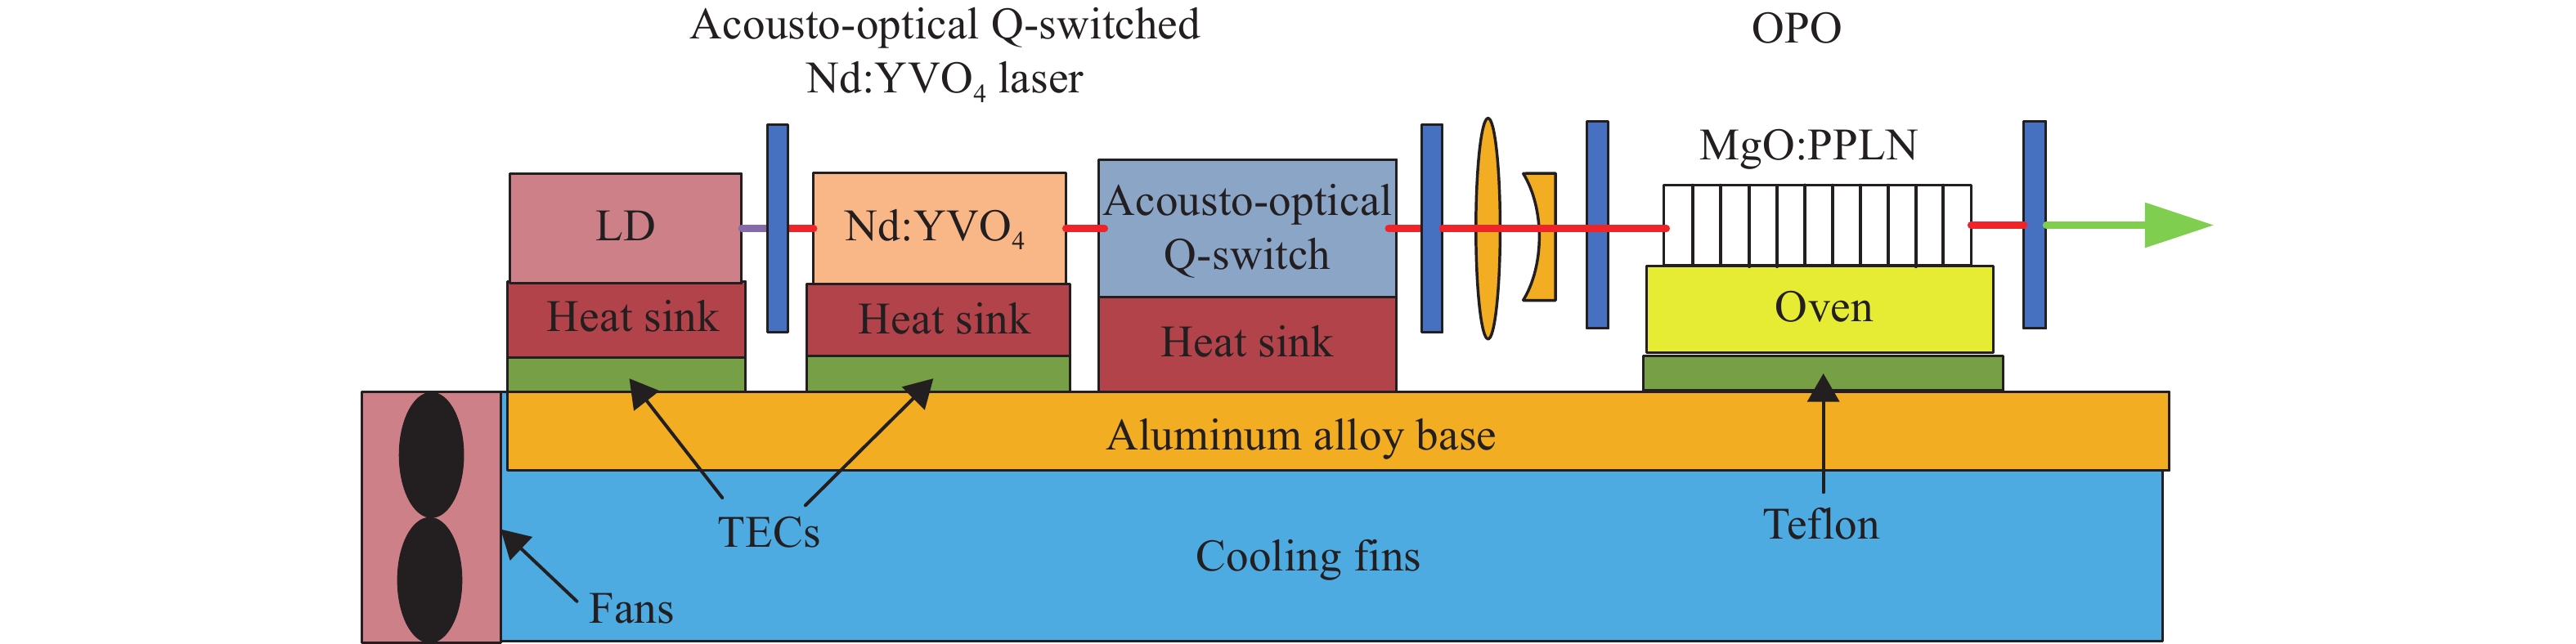 Schematic of thermal control system for OPO